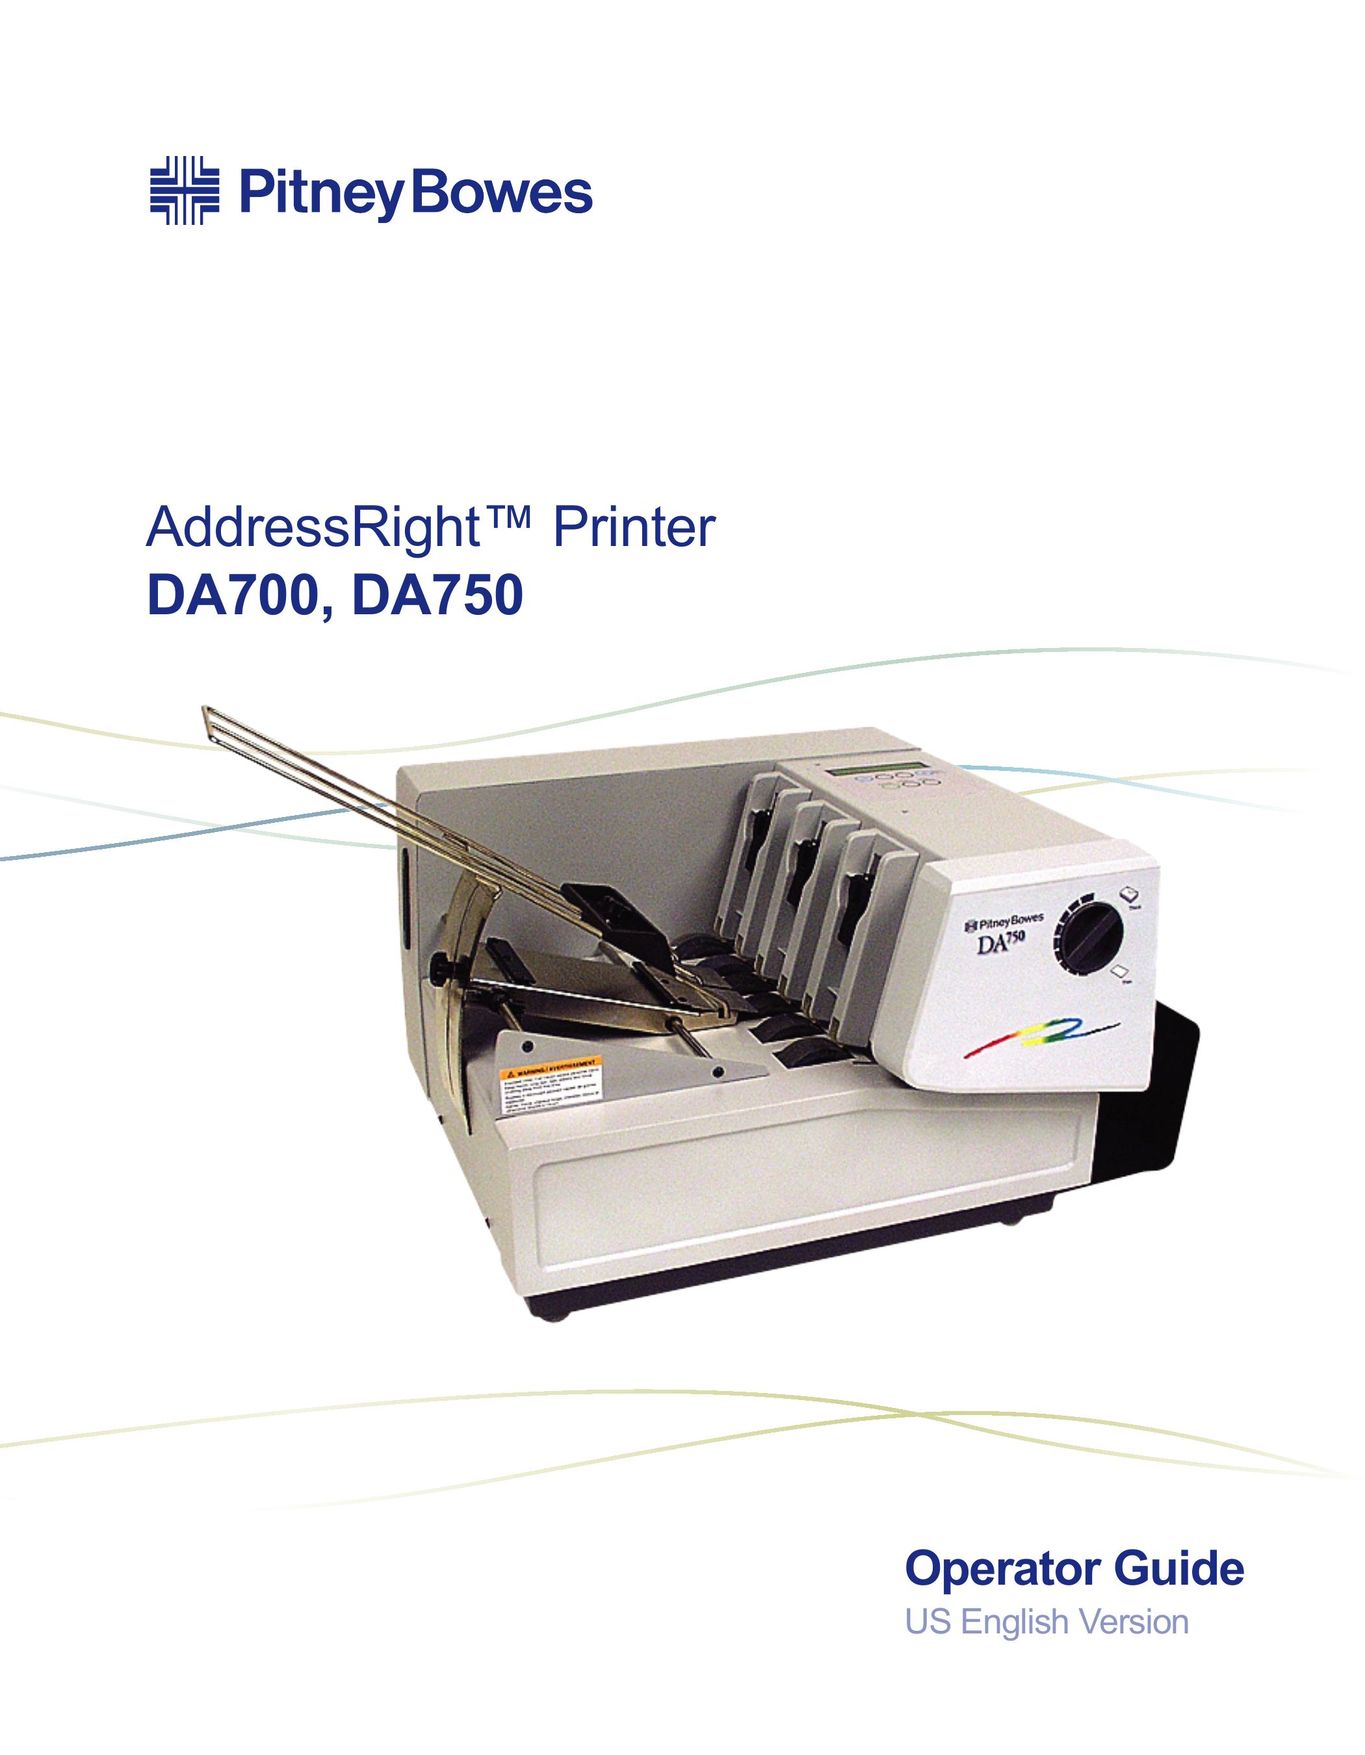 Pitney Bowes DA700 All in One Printer User Manual